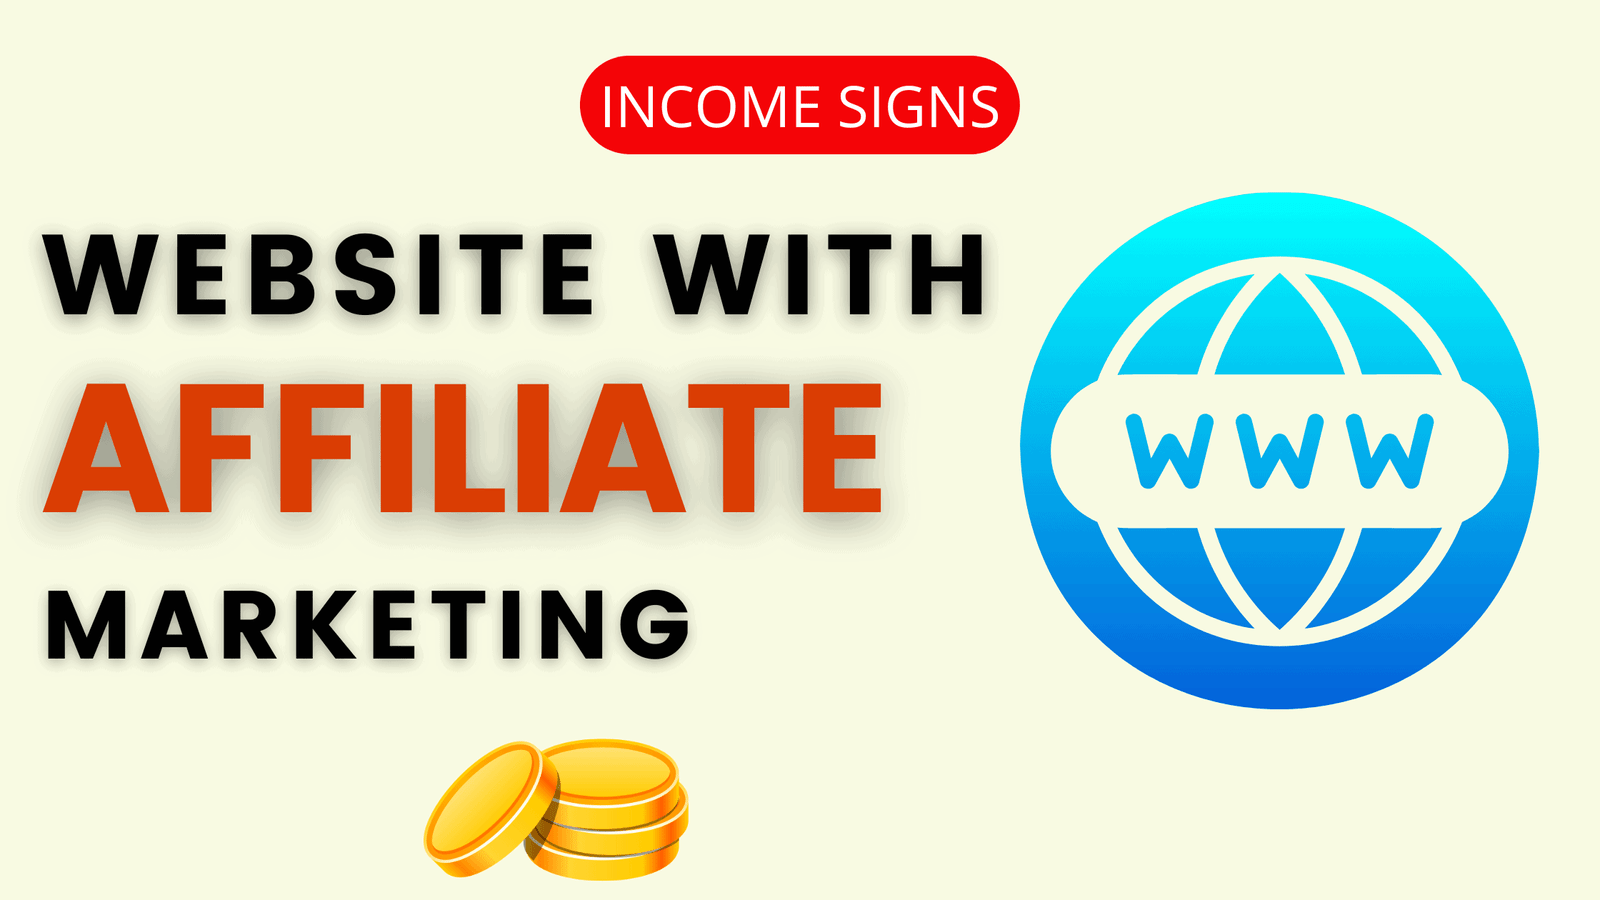 How to Do Affiliate Marketing With a Website?